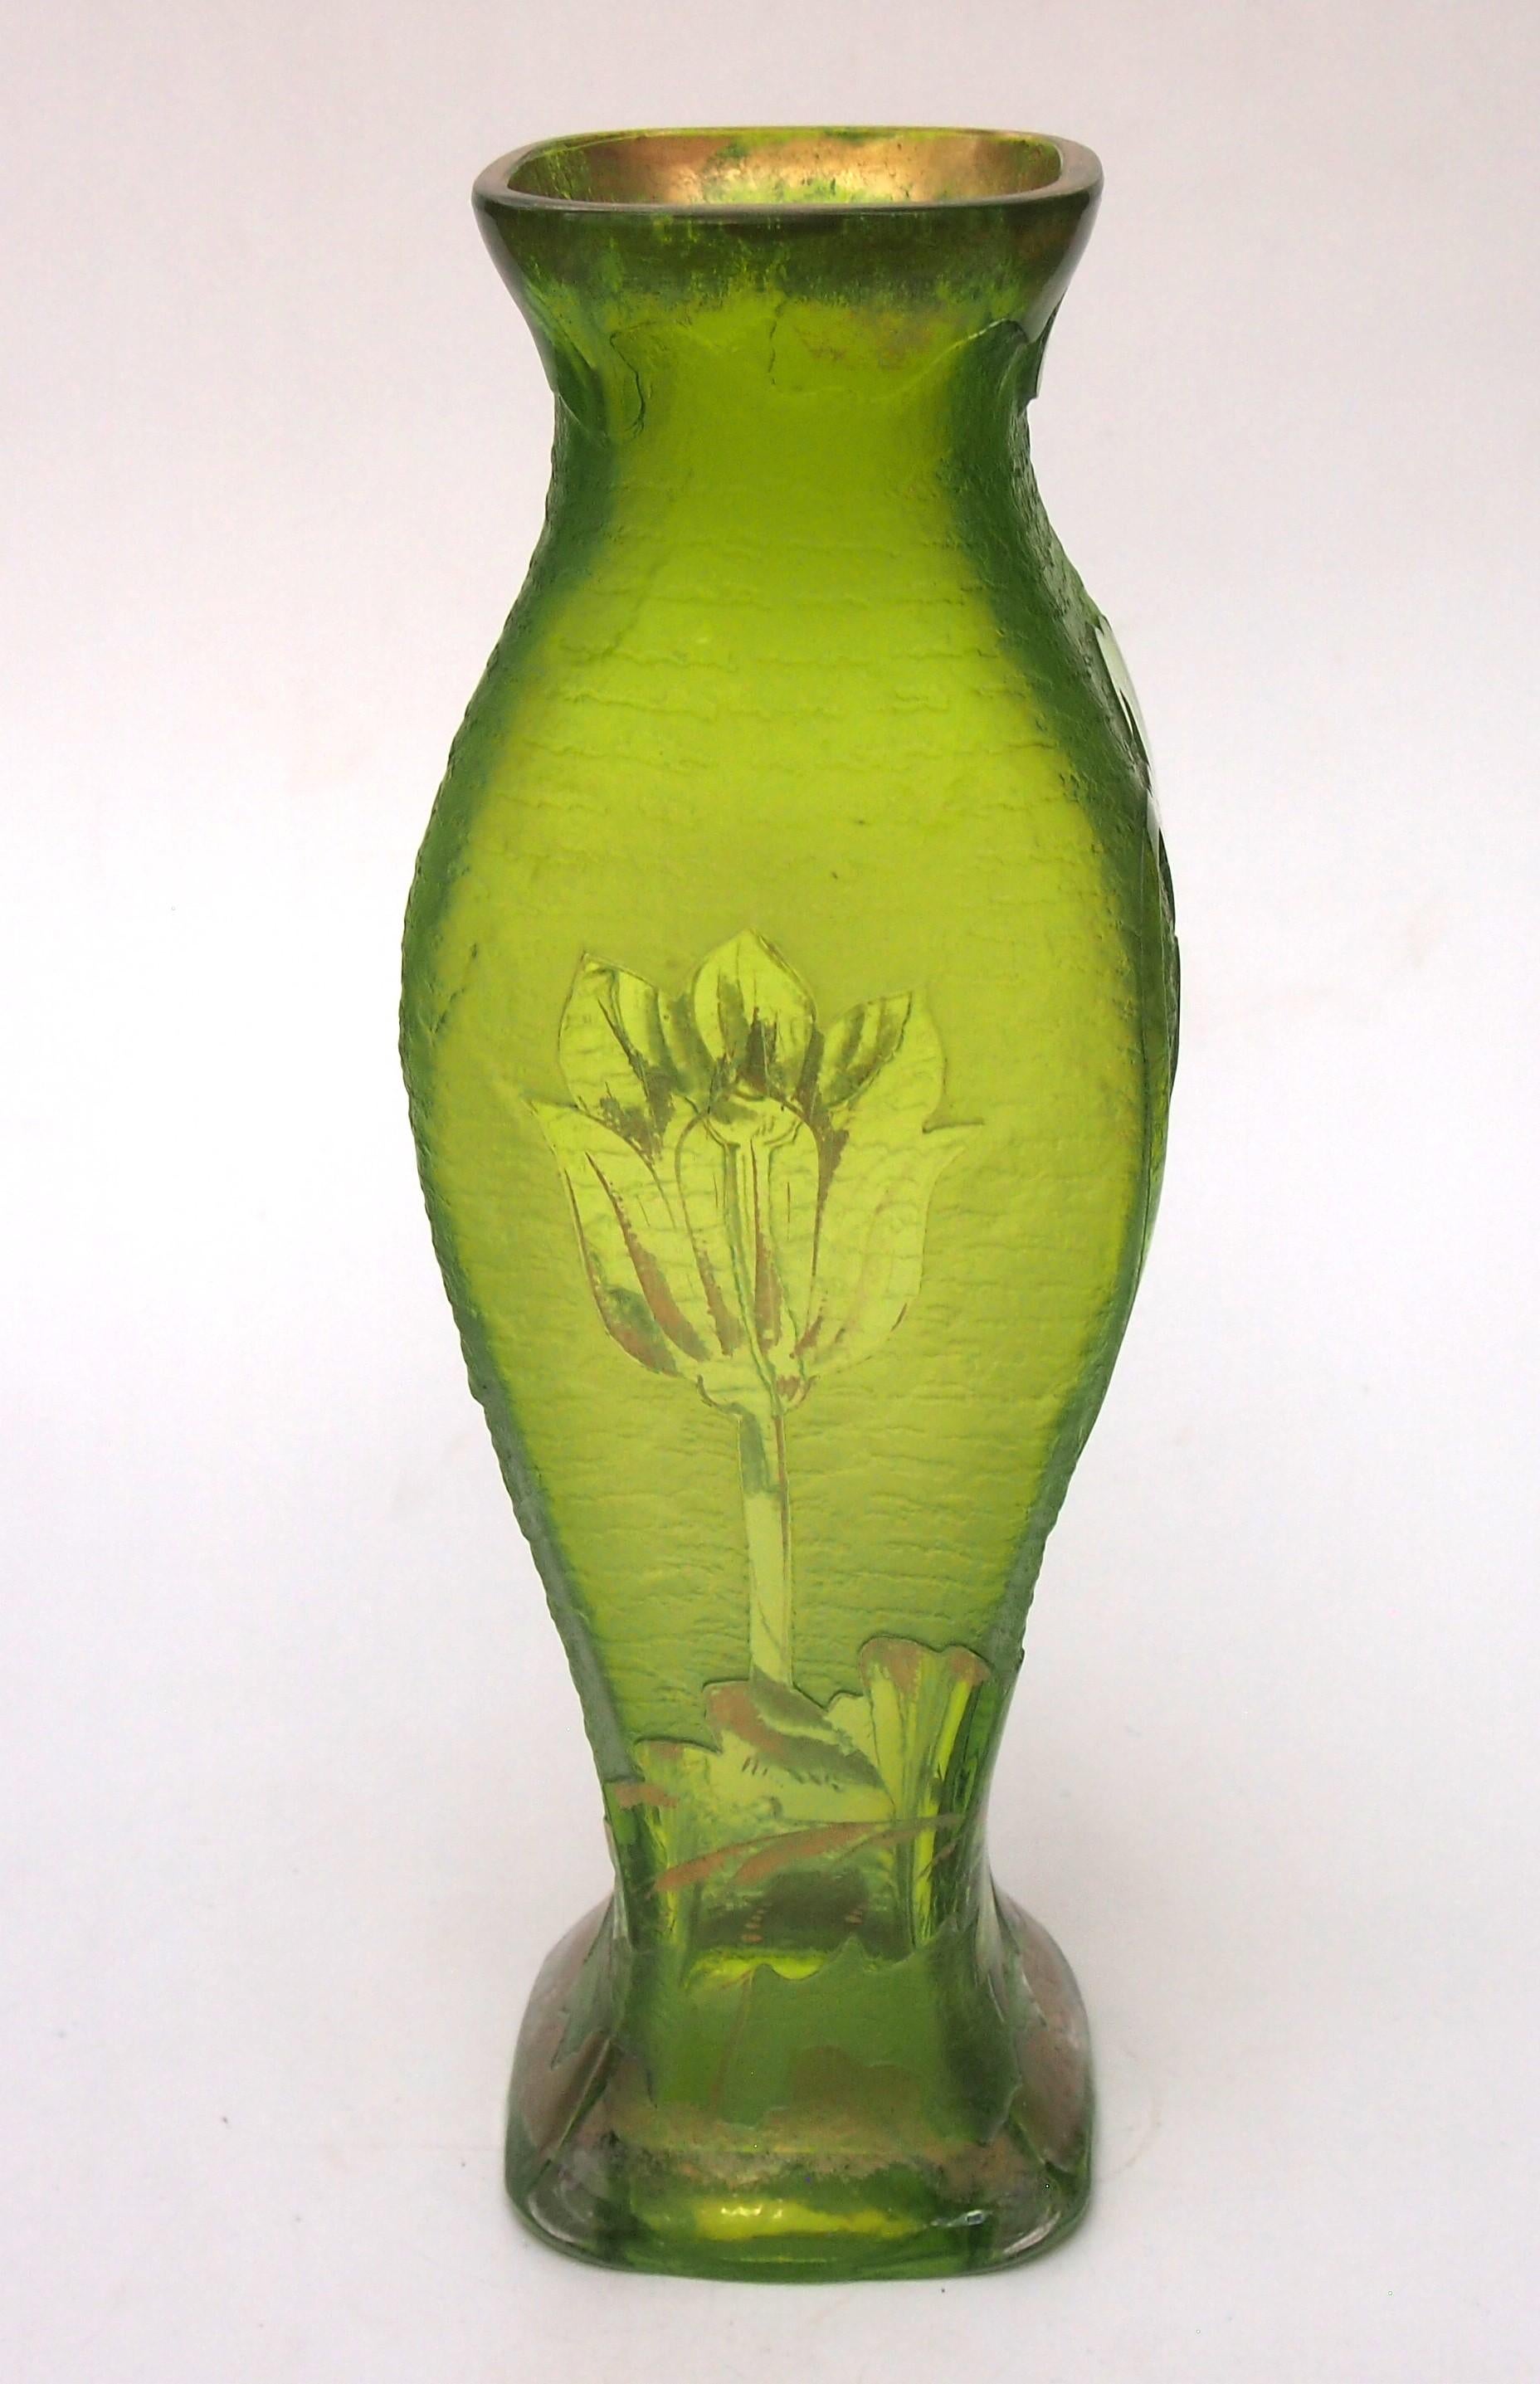 Czech Fabulous acid cut back and gilded glass Riedel Vase c 1900 with flowering lilies